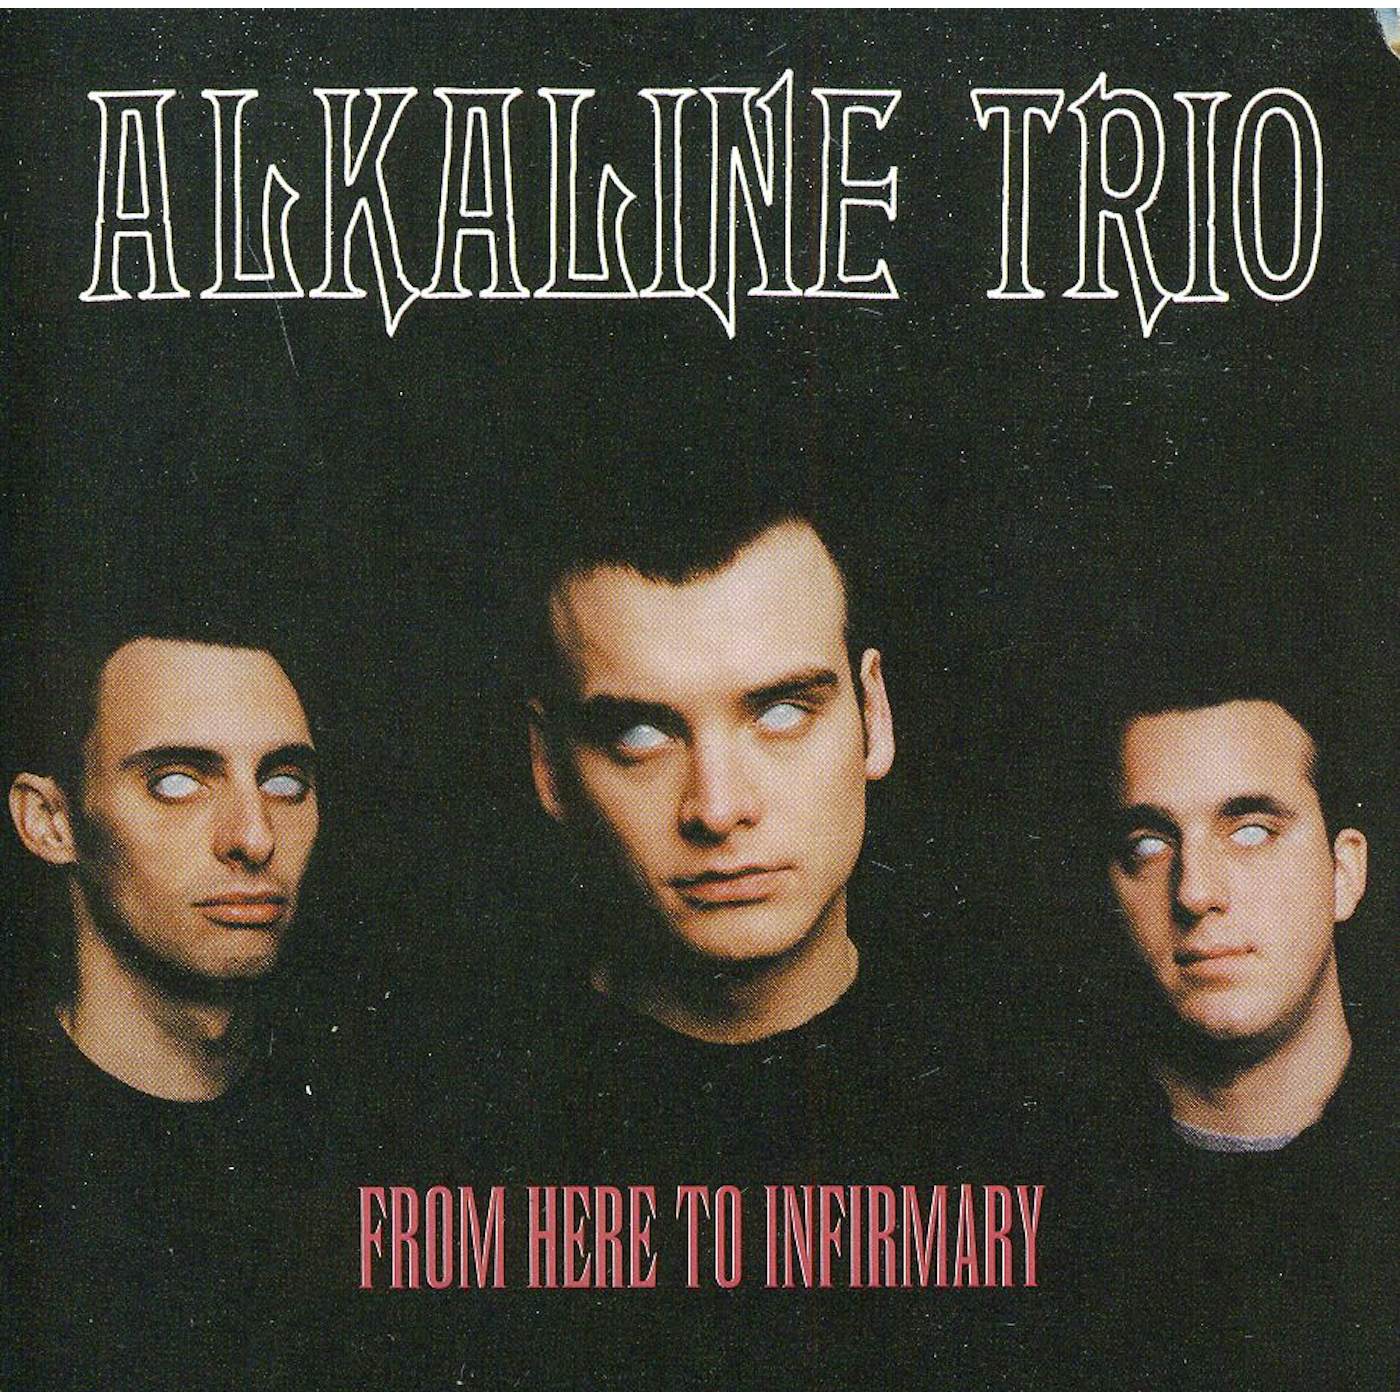 Alkaline Trio FROM HERE TO INFIRMARY CD